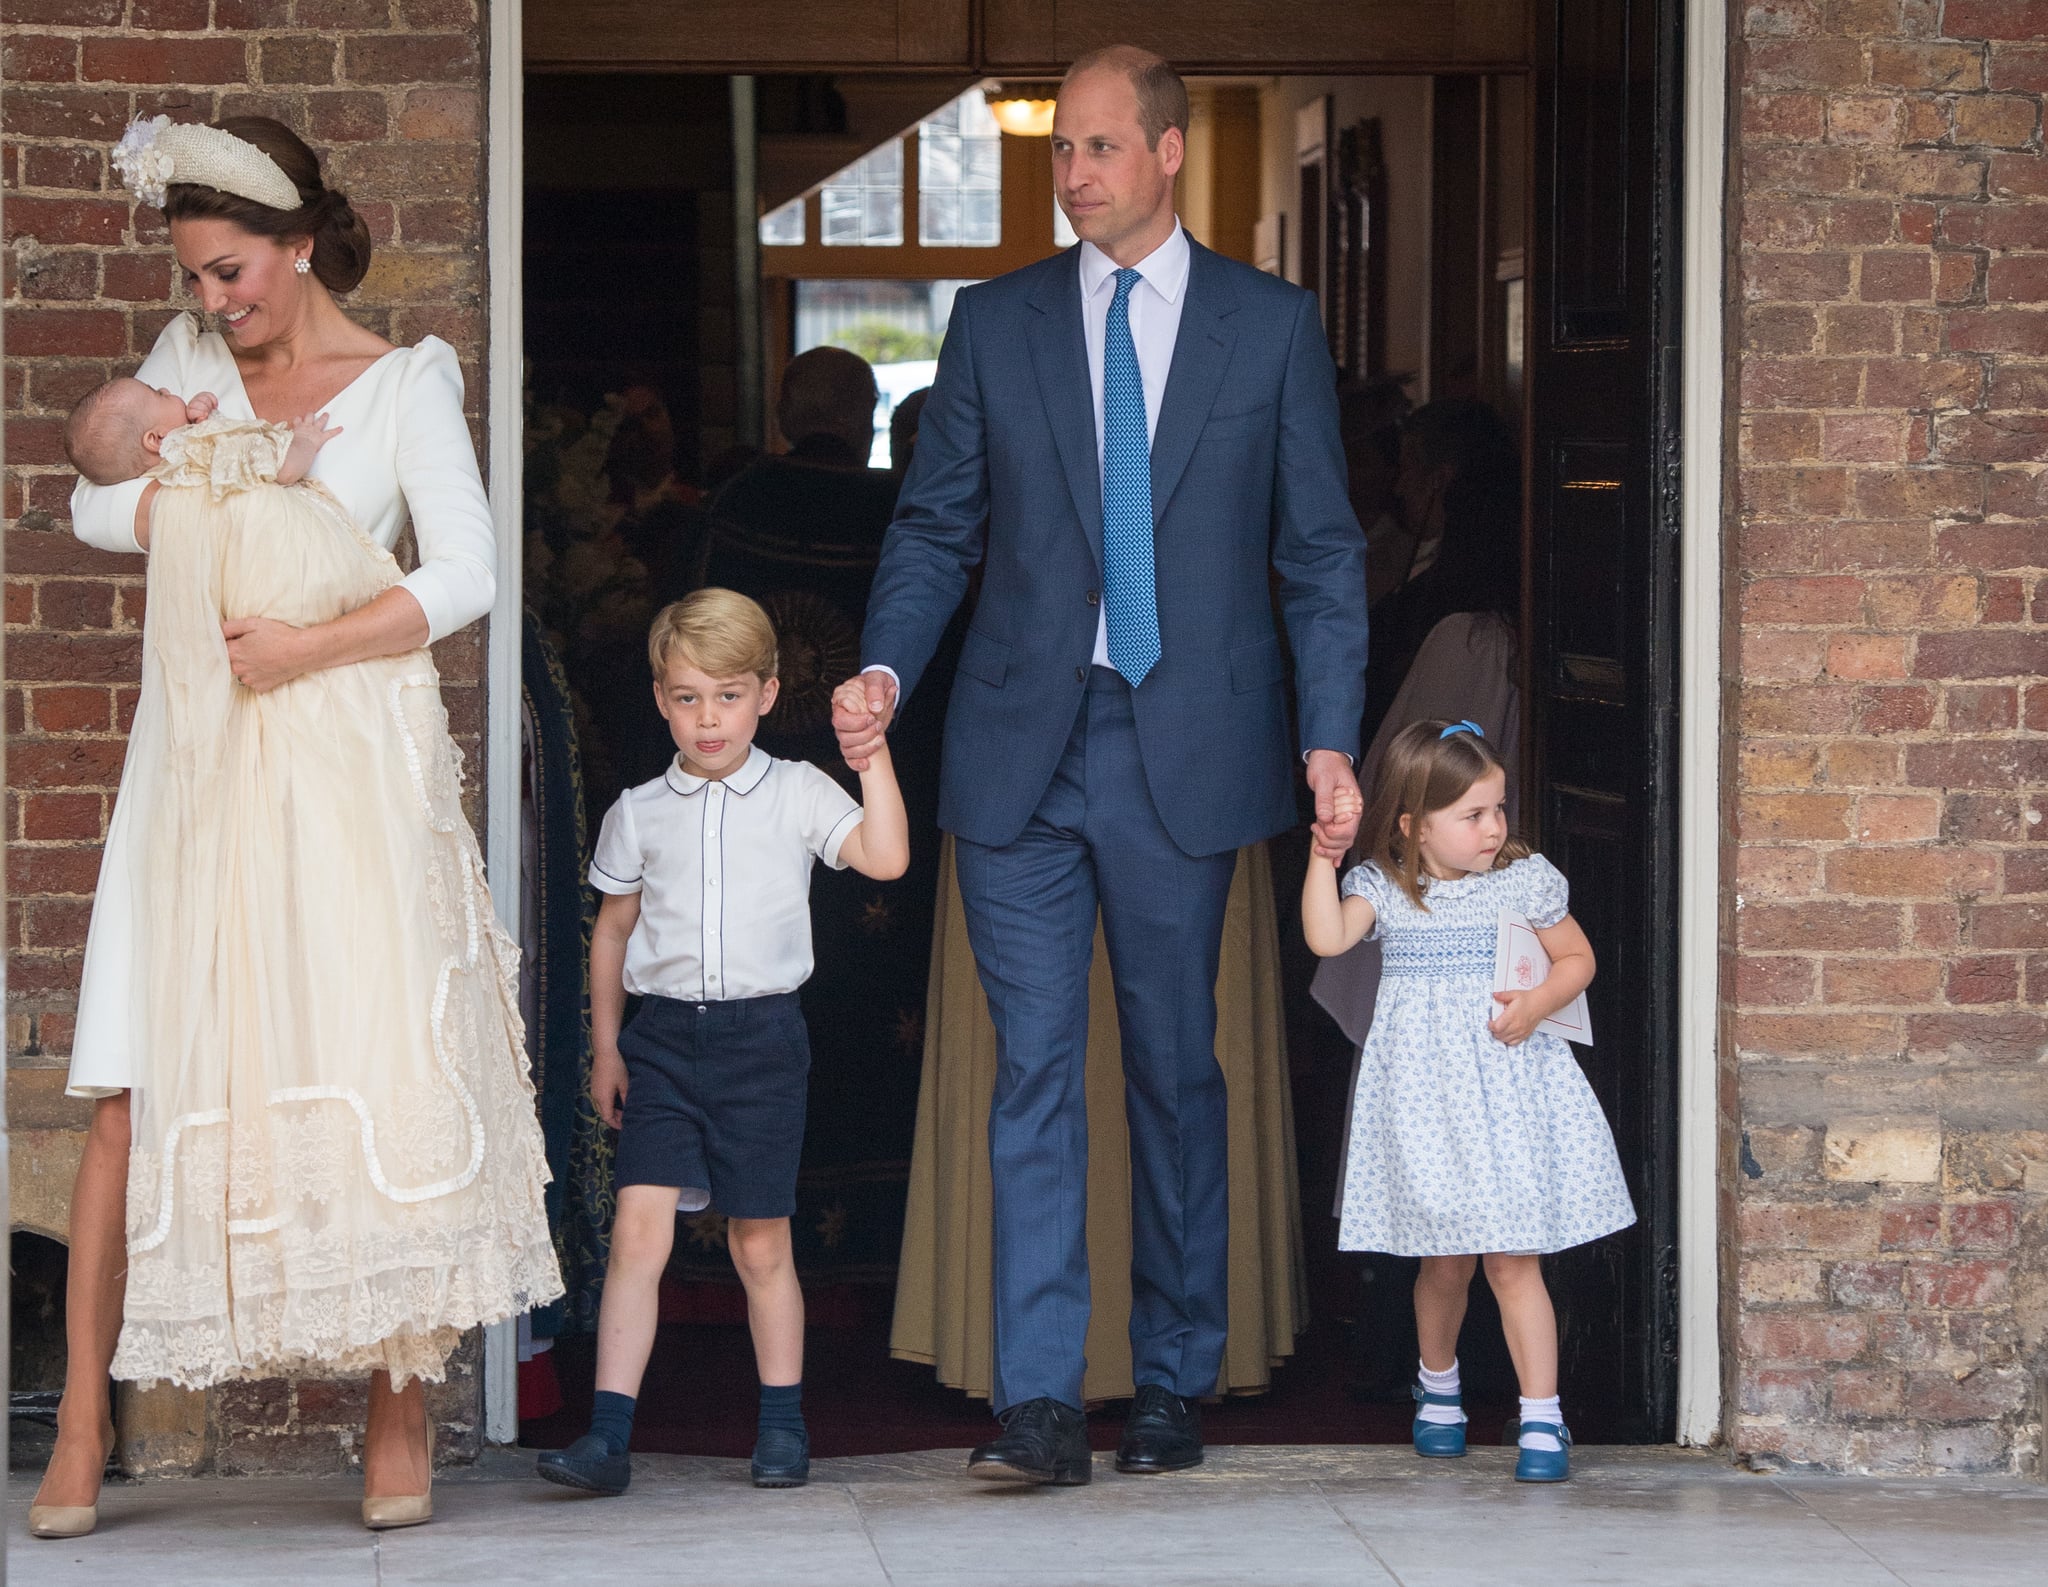 LONDON, ENGLAND - JULY 09: Catherine Duchess of Cambridge and Prince William, Duke of Cambridge with their children Prince George, Princess Charlotte and Prince Louis after Prince Louis